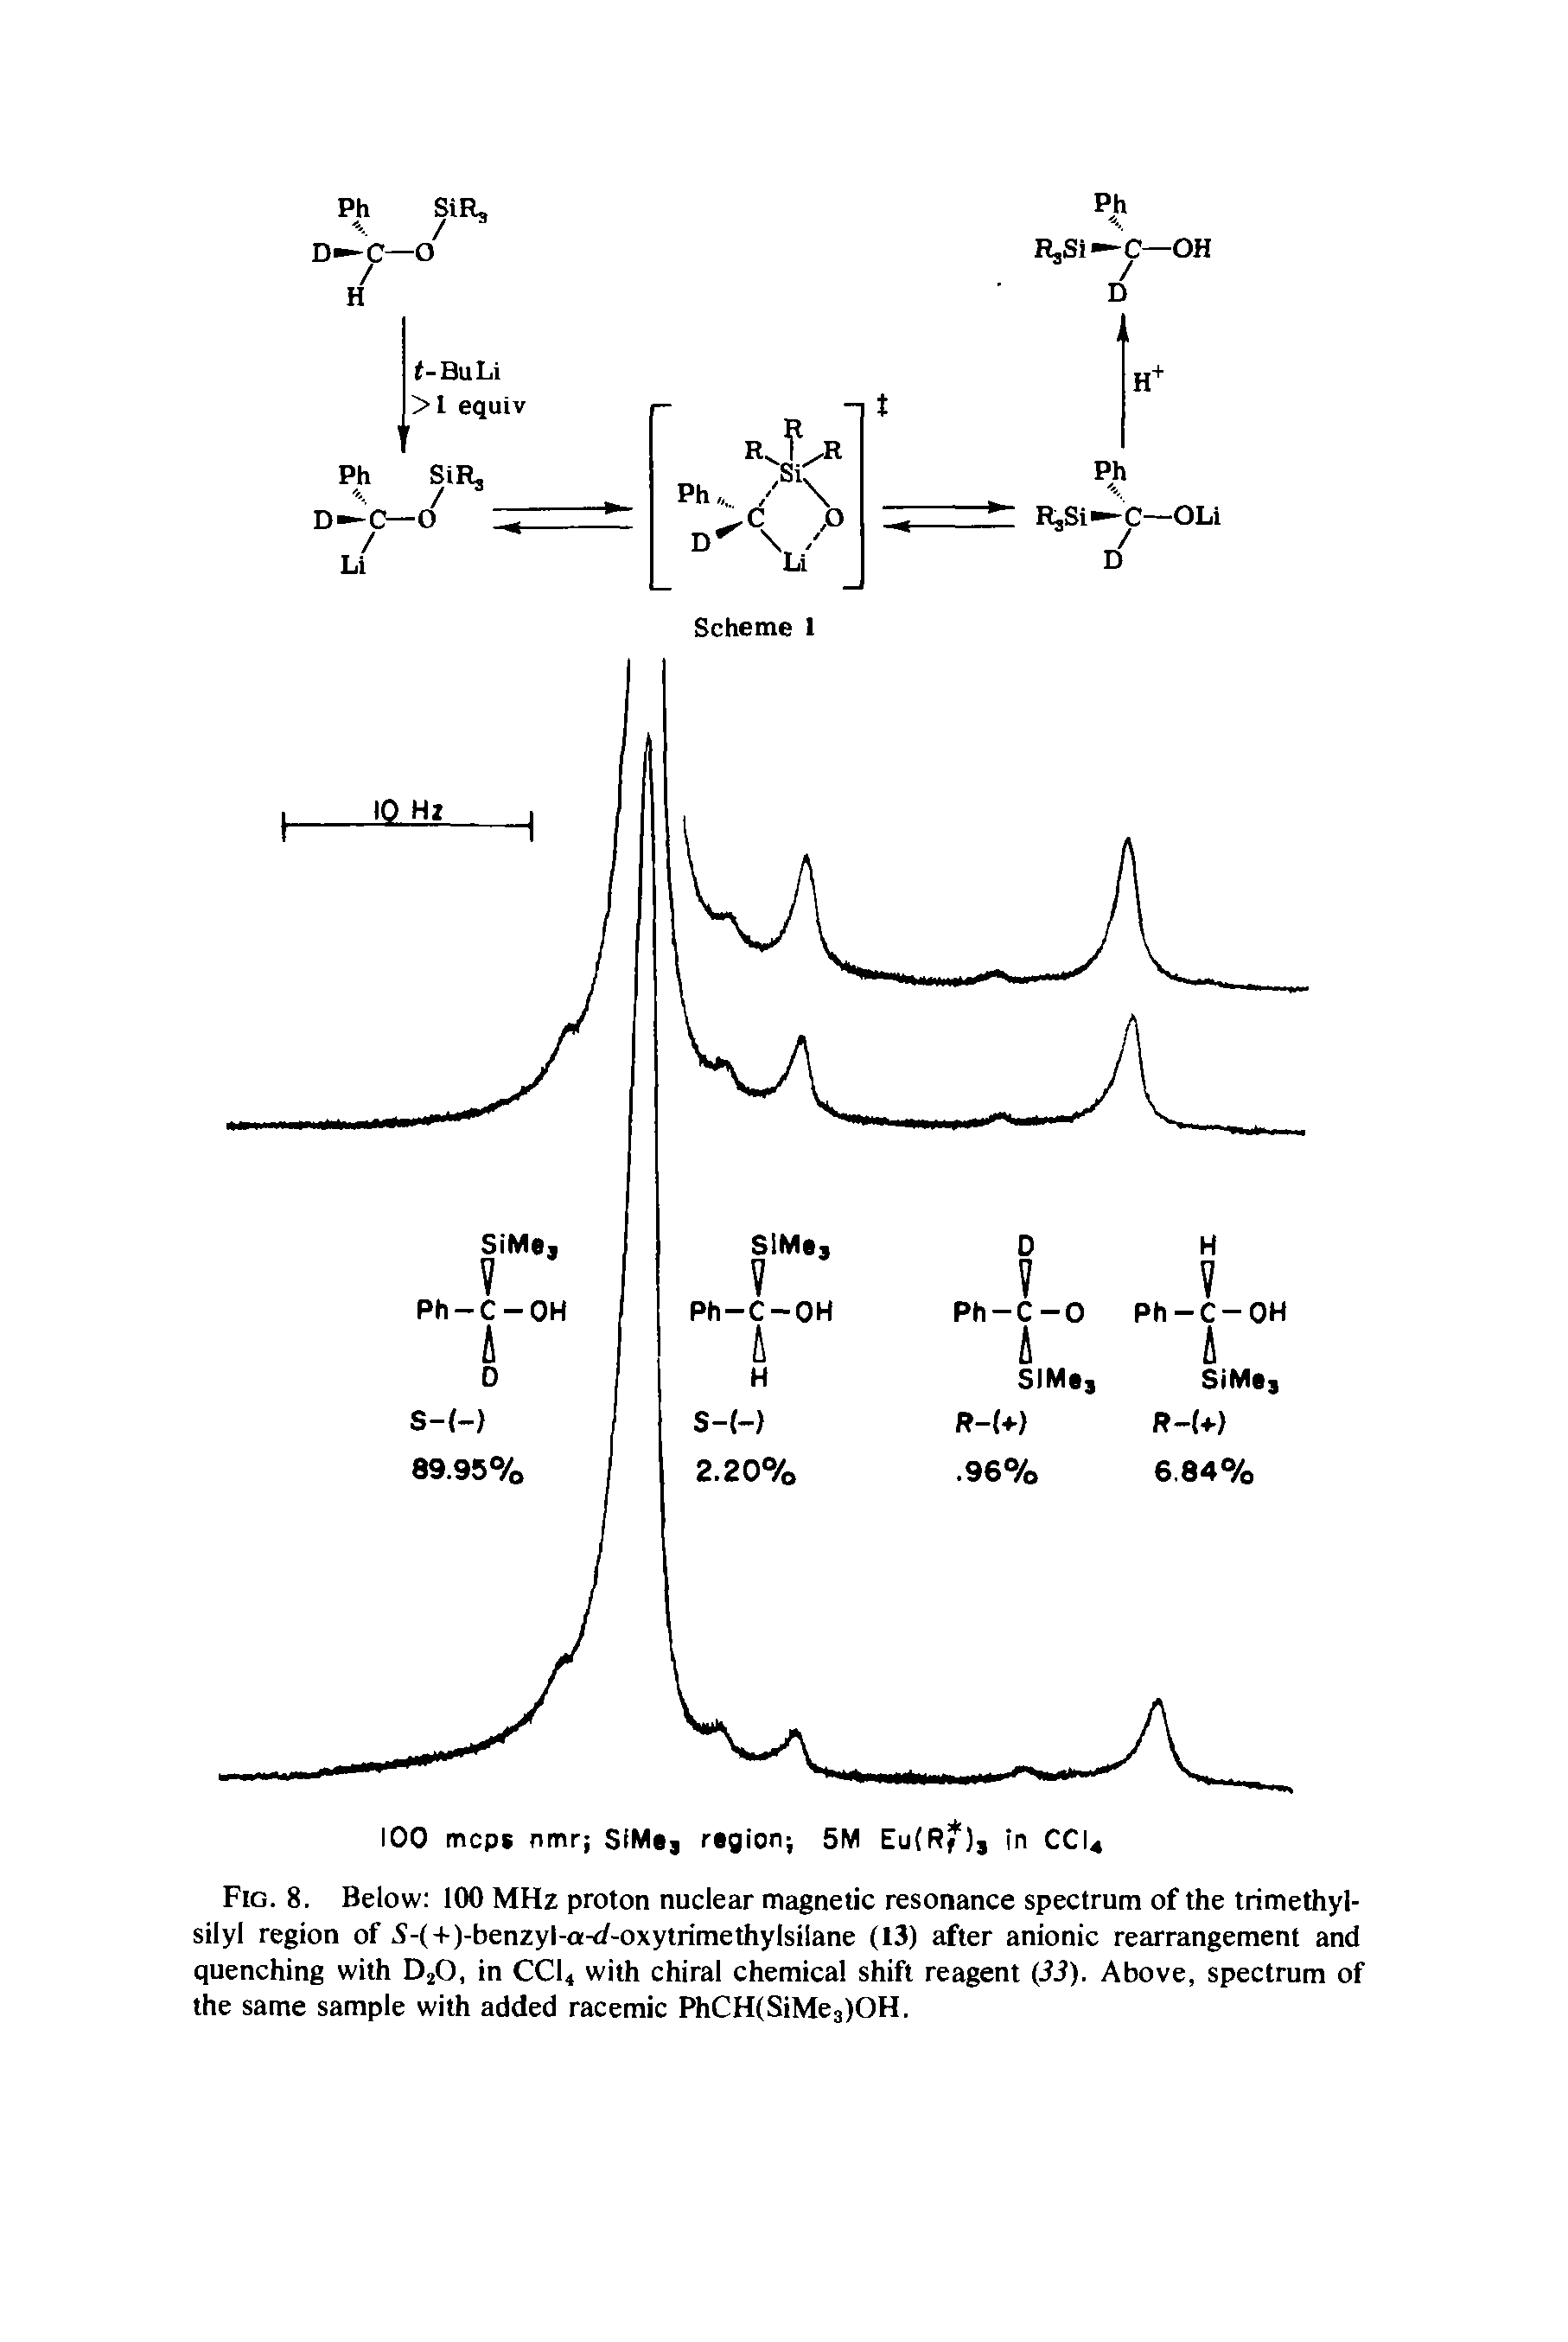 Fig. 8. Below 100 MHz proton nuclear magnetic resonance spectrum of the trimethyl-silyl region of 5-(+)-benzyl-a-</-oxytrimethylsilane (13) after anionic rearrangement and quenching with DjO, in CCI4 with chiral chemical shift reagent (33). Above, spectrum of the same sample with added racemic PhCH(SiMe3>OH.